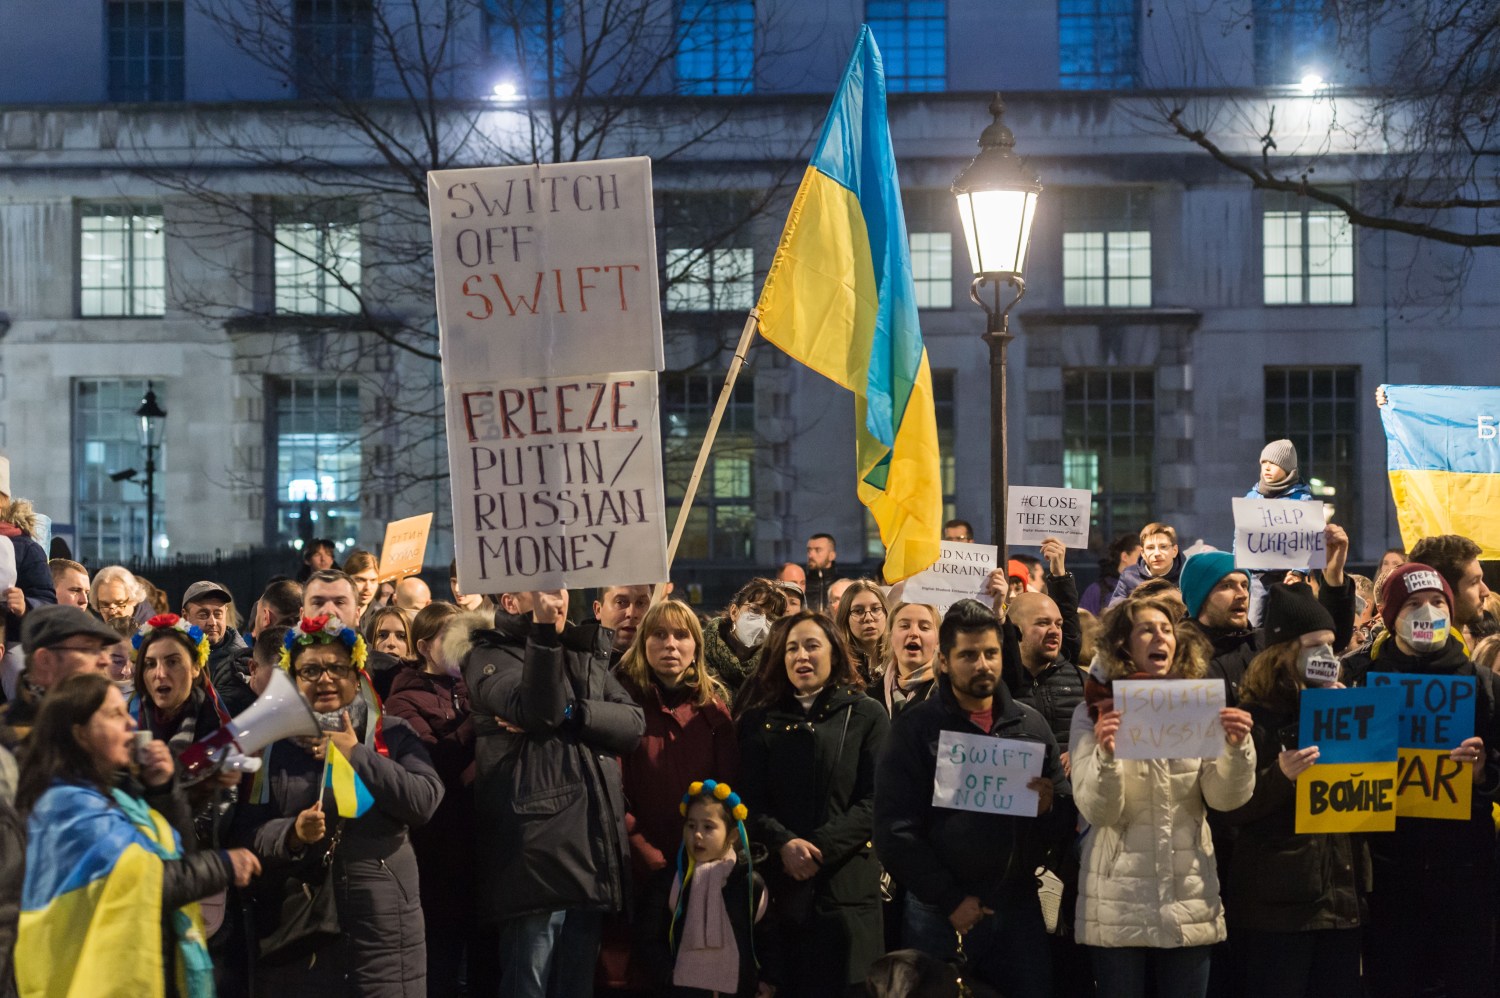 LONDON, UNITED KINGDOM - FEBRUARY 25, 2022: Ukrainian people and their supporters demonstrate outside Downing Street calling for the West to implement strong sanctions against Russia including ban on energy trade, exclusion from Swift payment network as well as more widespread sanctions targeting individuals and businesses associated with Kremlin after Vladimir Putin launched a full-scale military invasion into the Ukrainian territory on February 25, 2022 in London, England. (Photo by WIktor Szymanowicz/NurPhoto)NO USE FRANCE